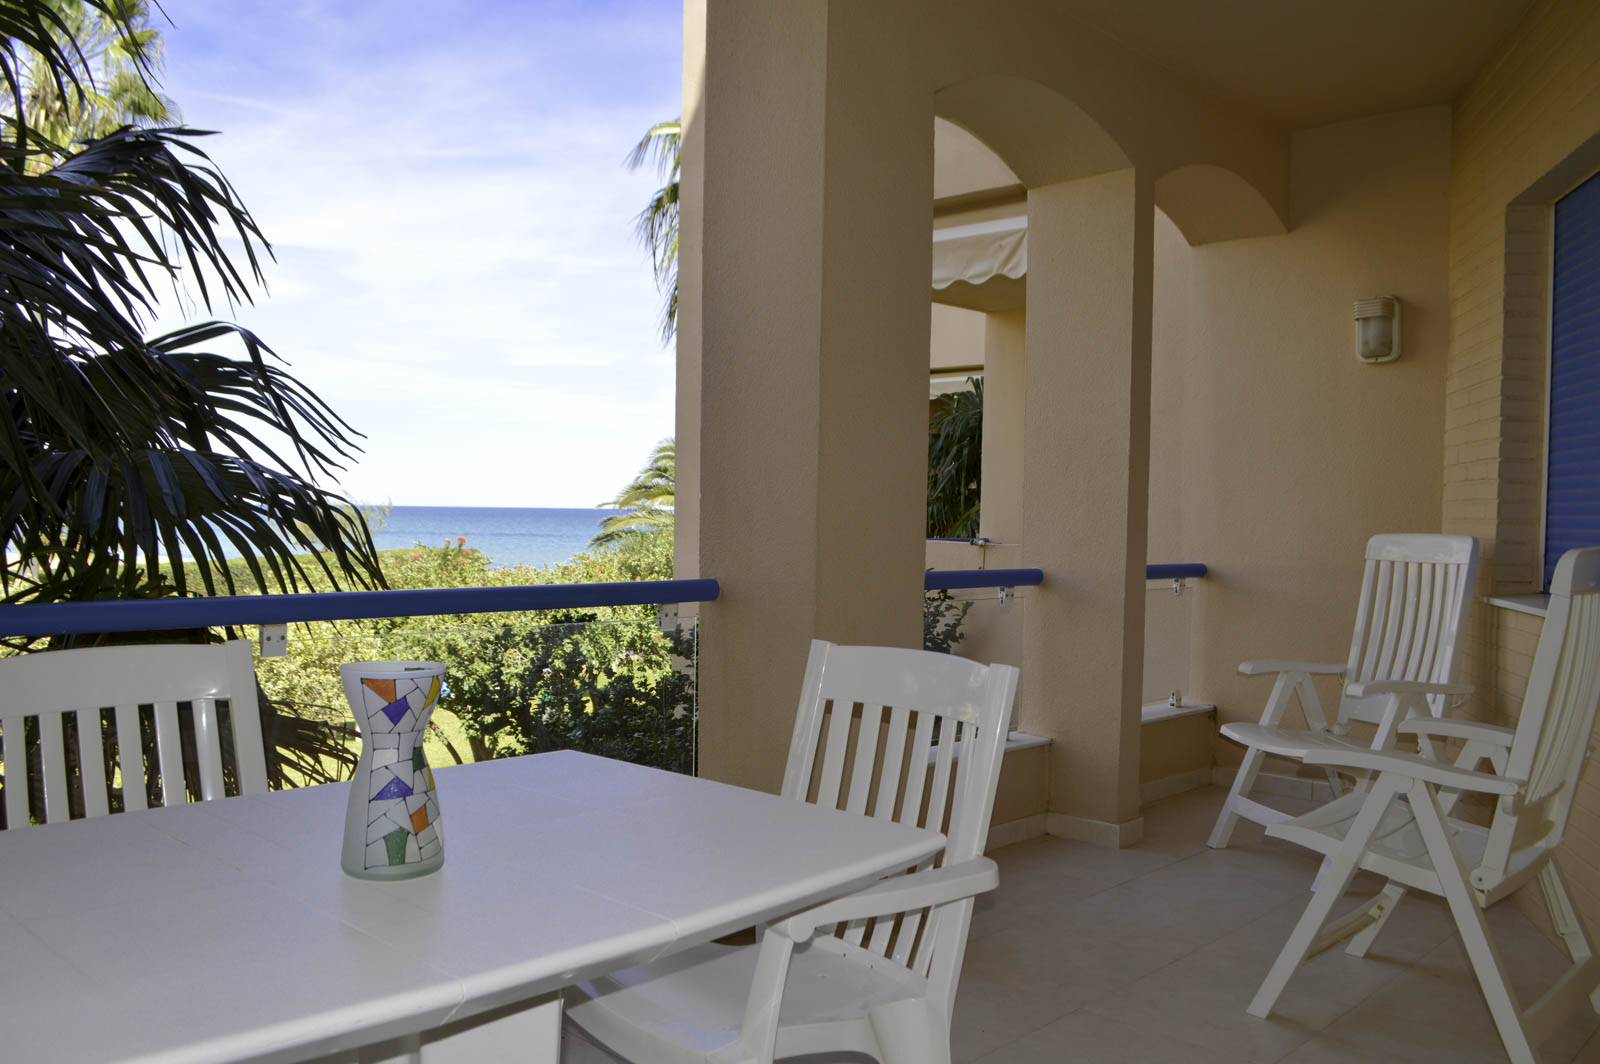 2-bedroom apartment with sea views and direct access to sandy beach